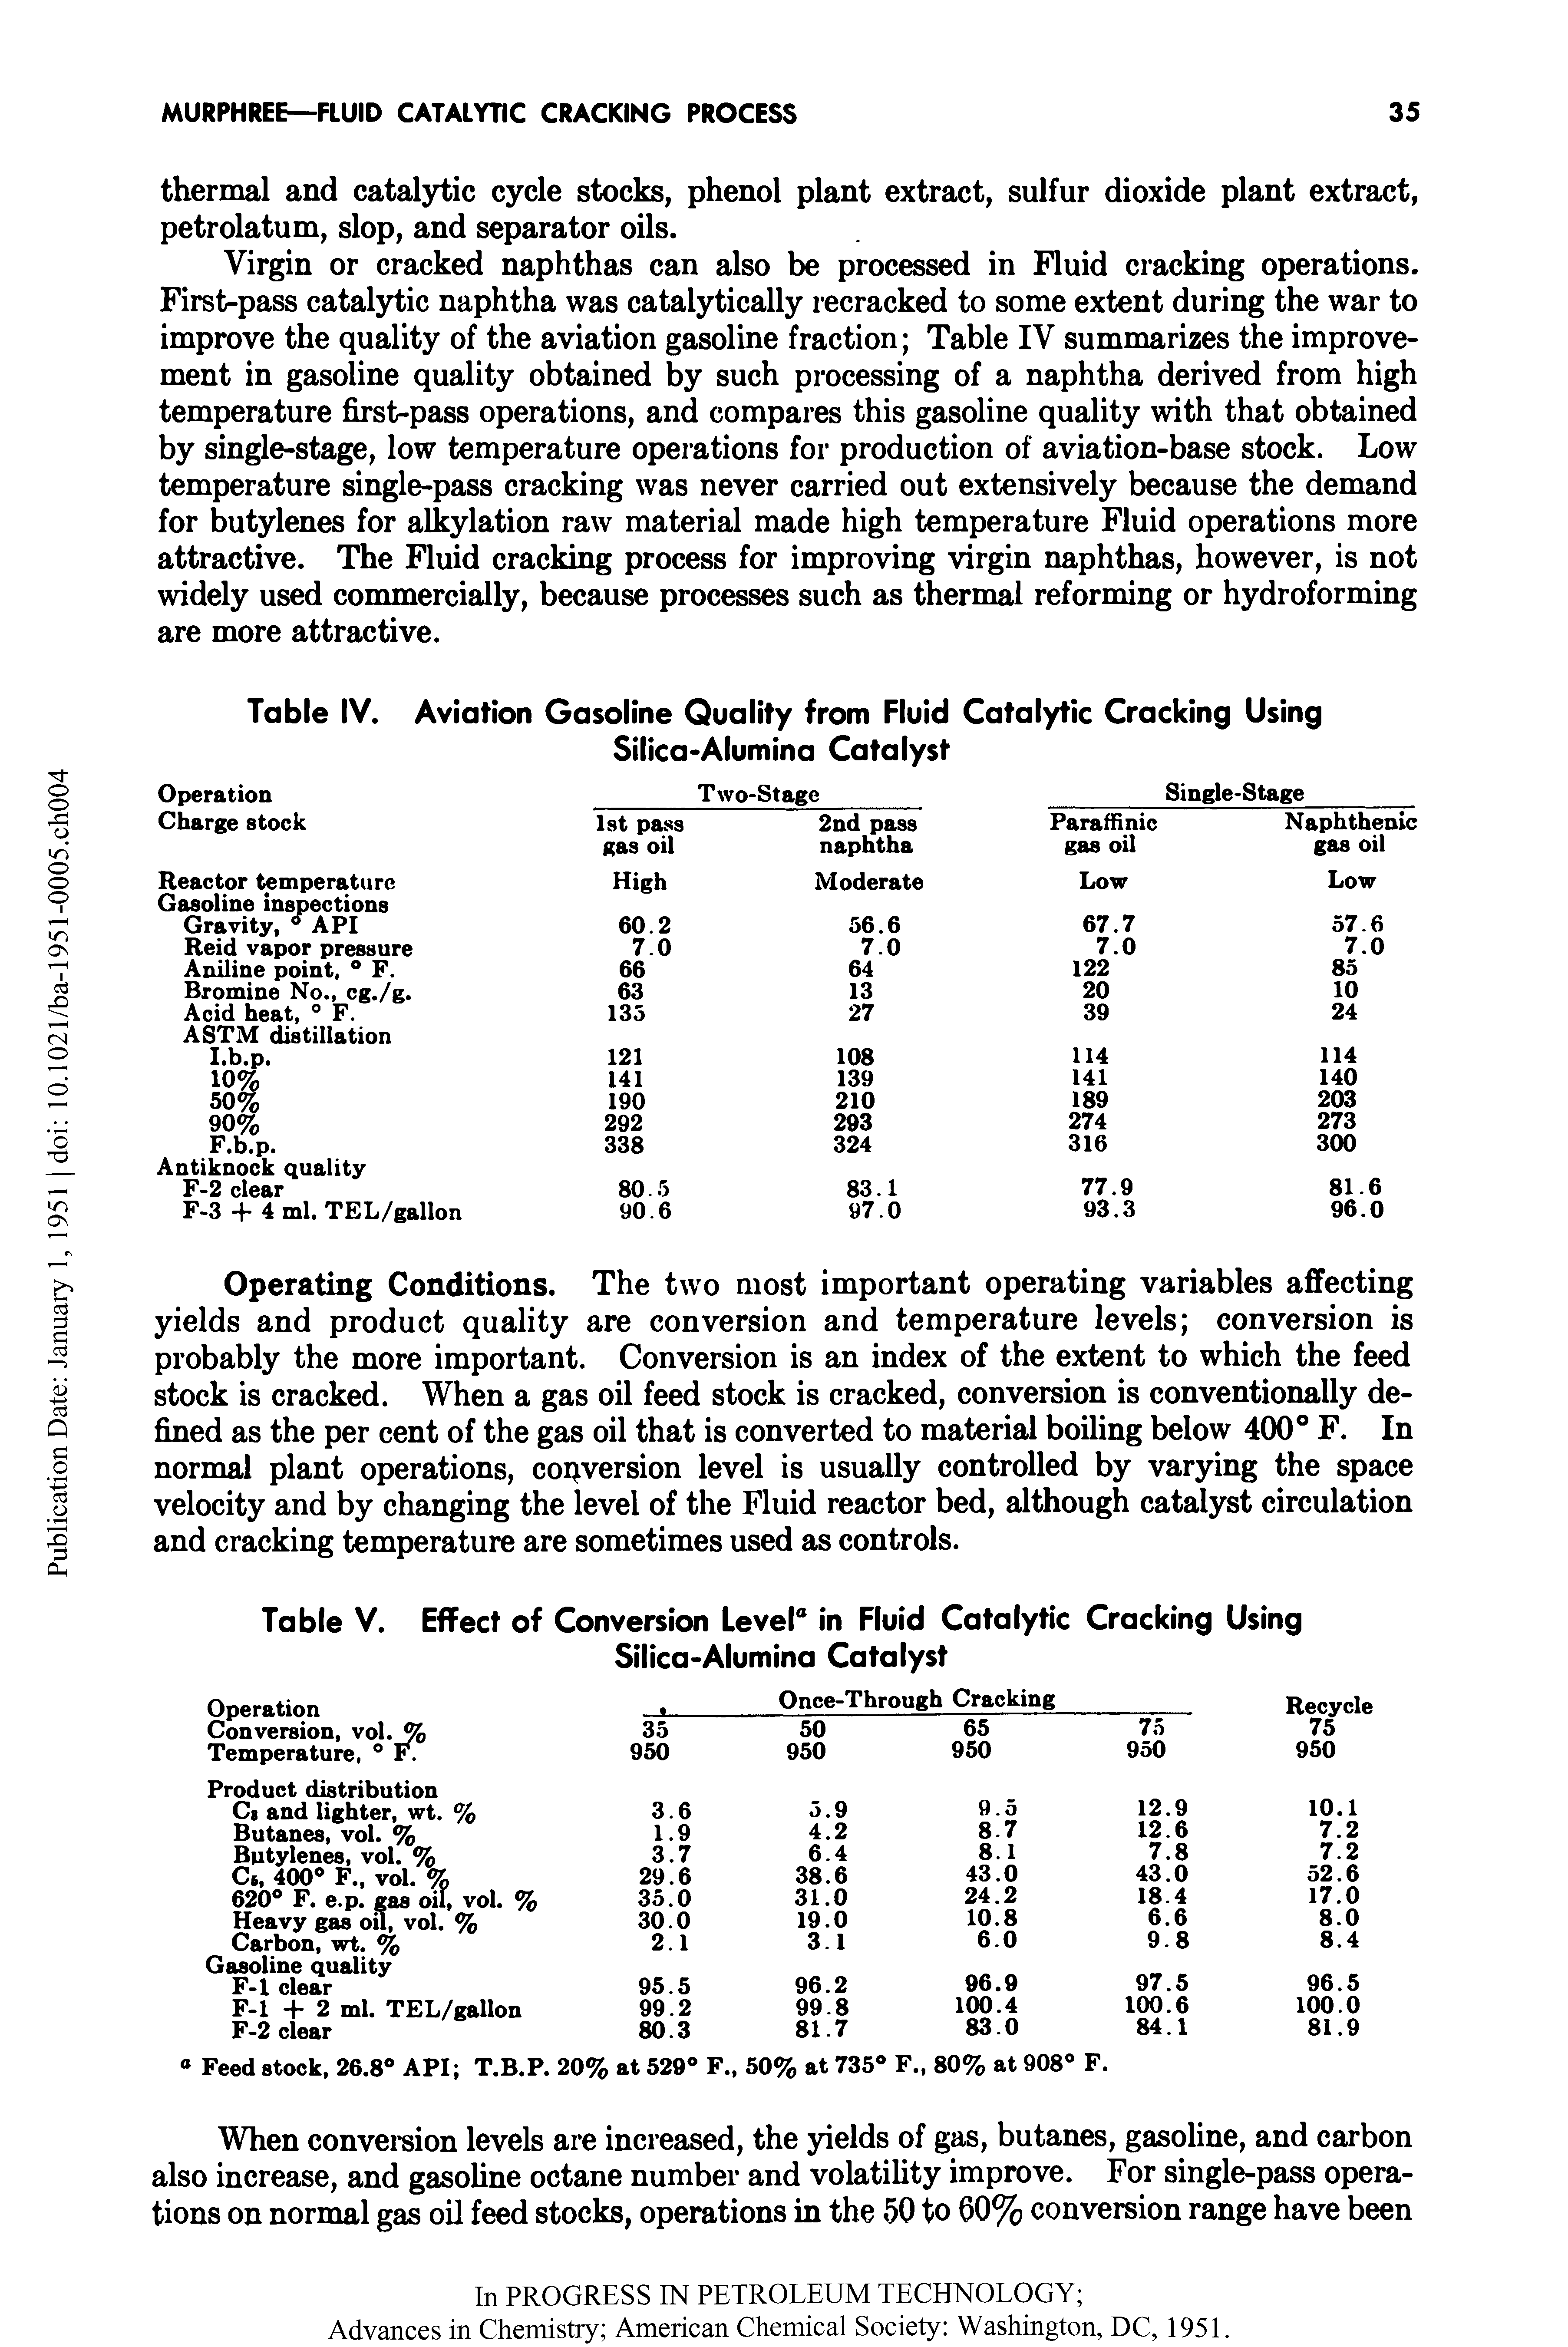 Table V. Effect of Conversion Level in Fluid Catalytic Cracking Using ...